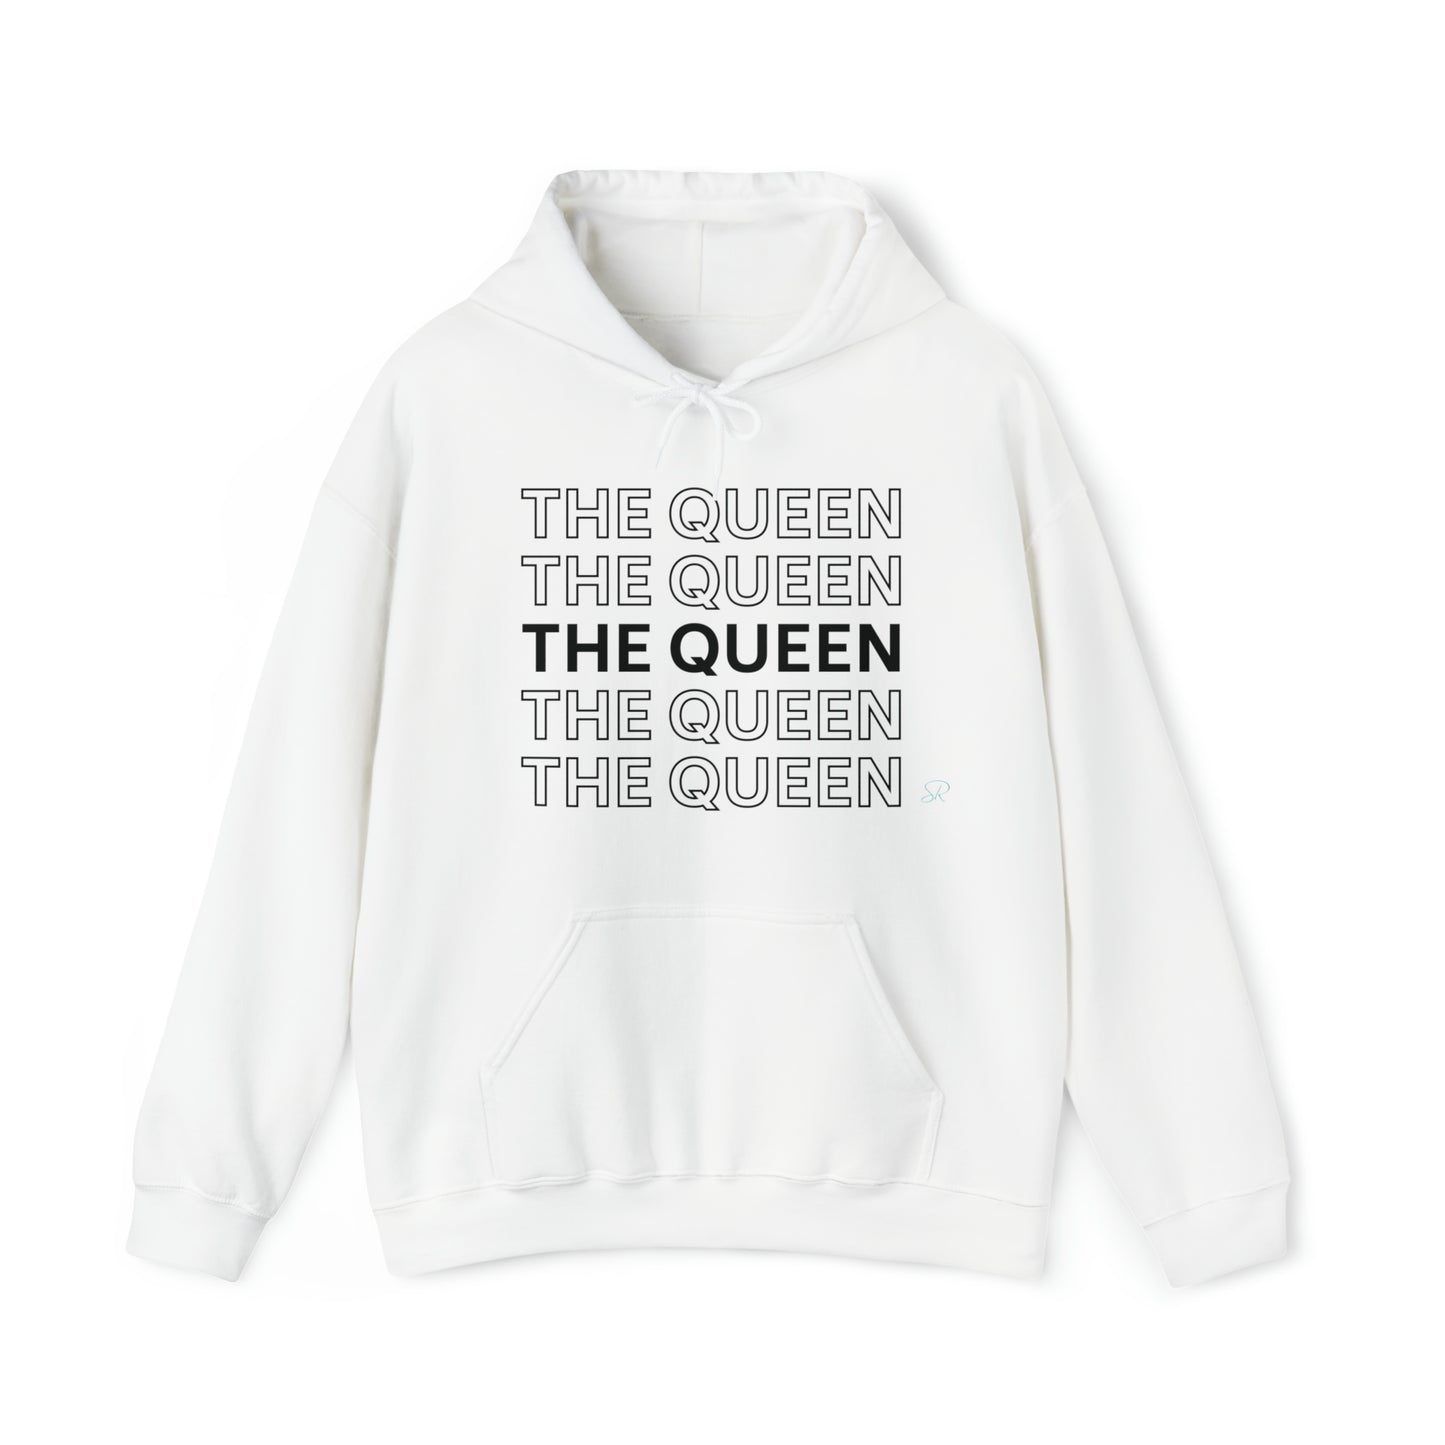 "The Queen, His Lover" Hoodie